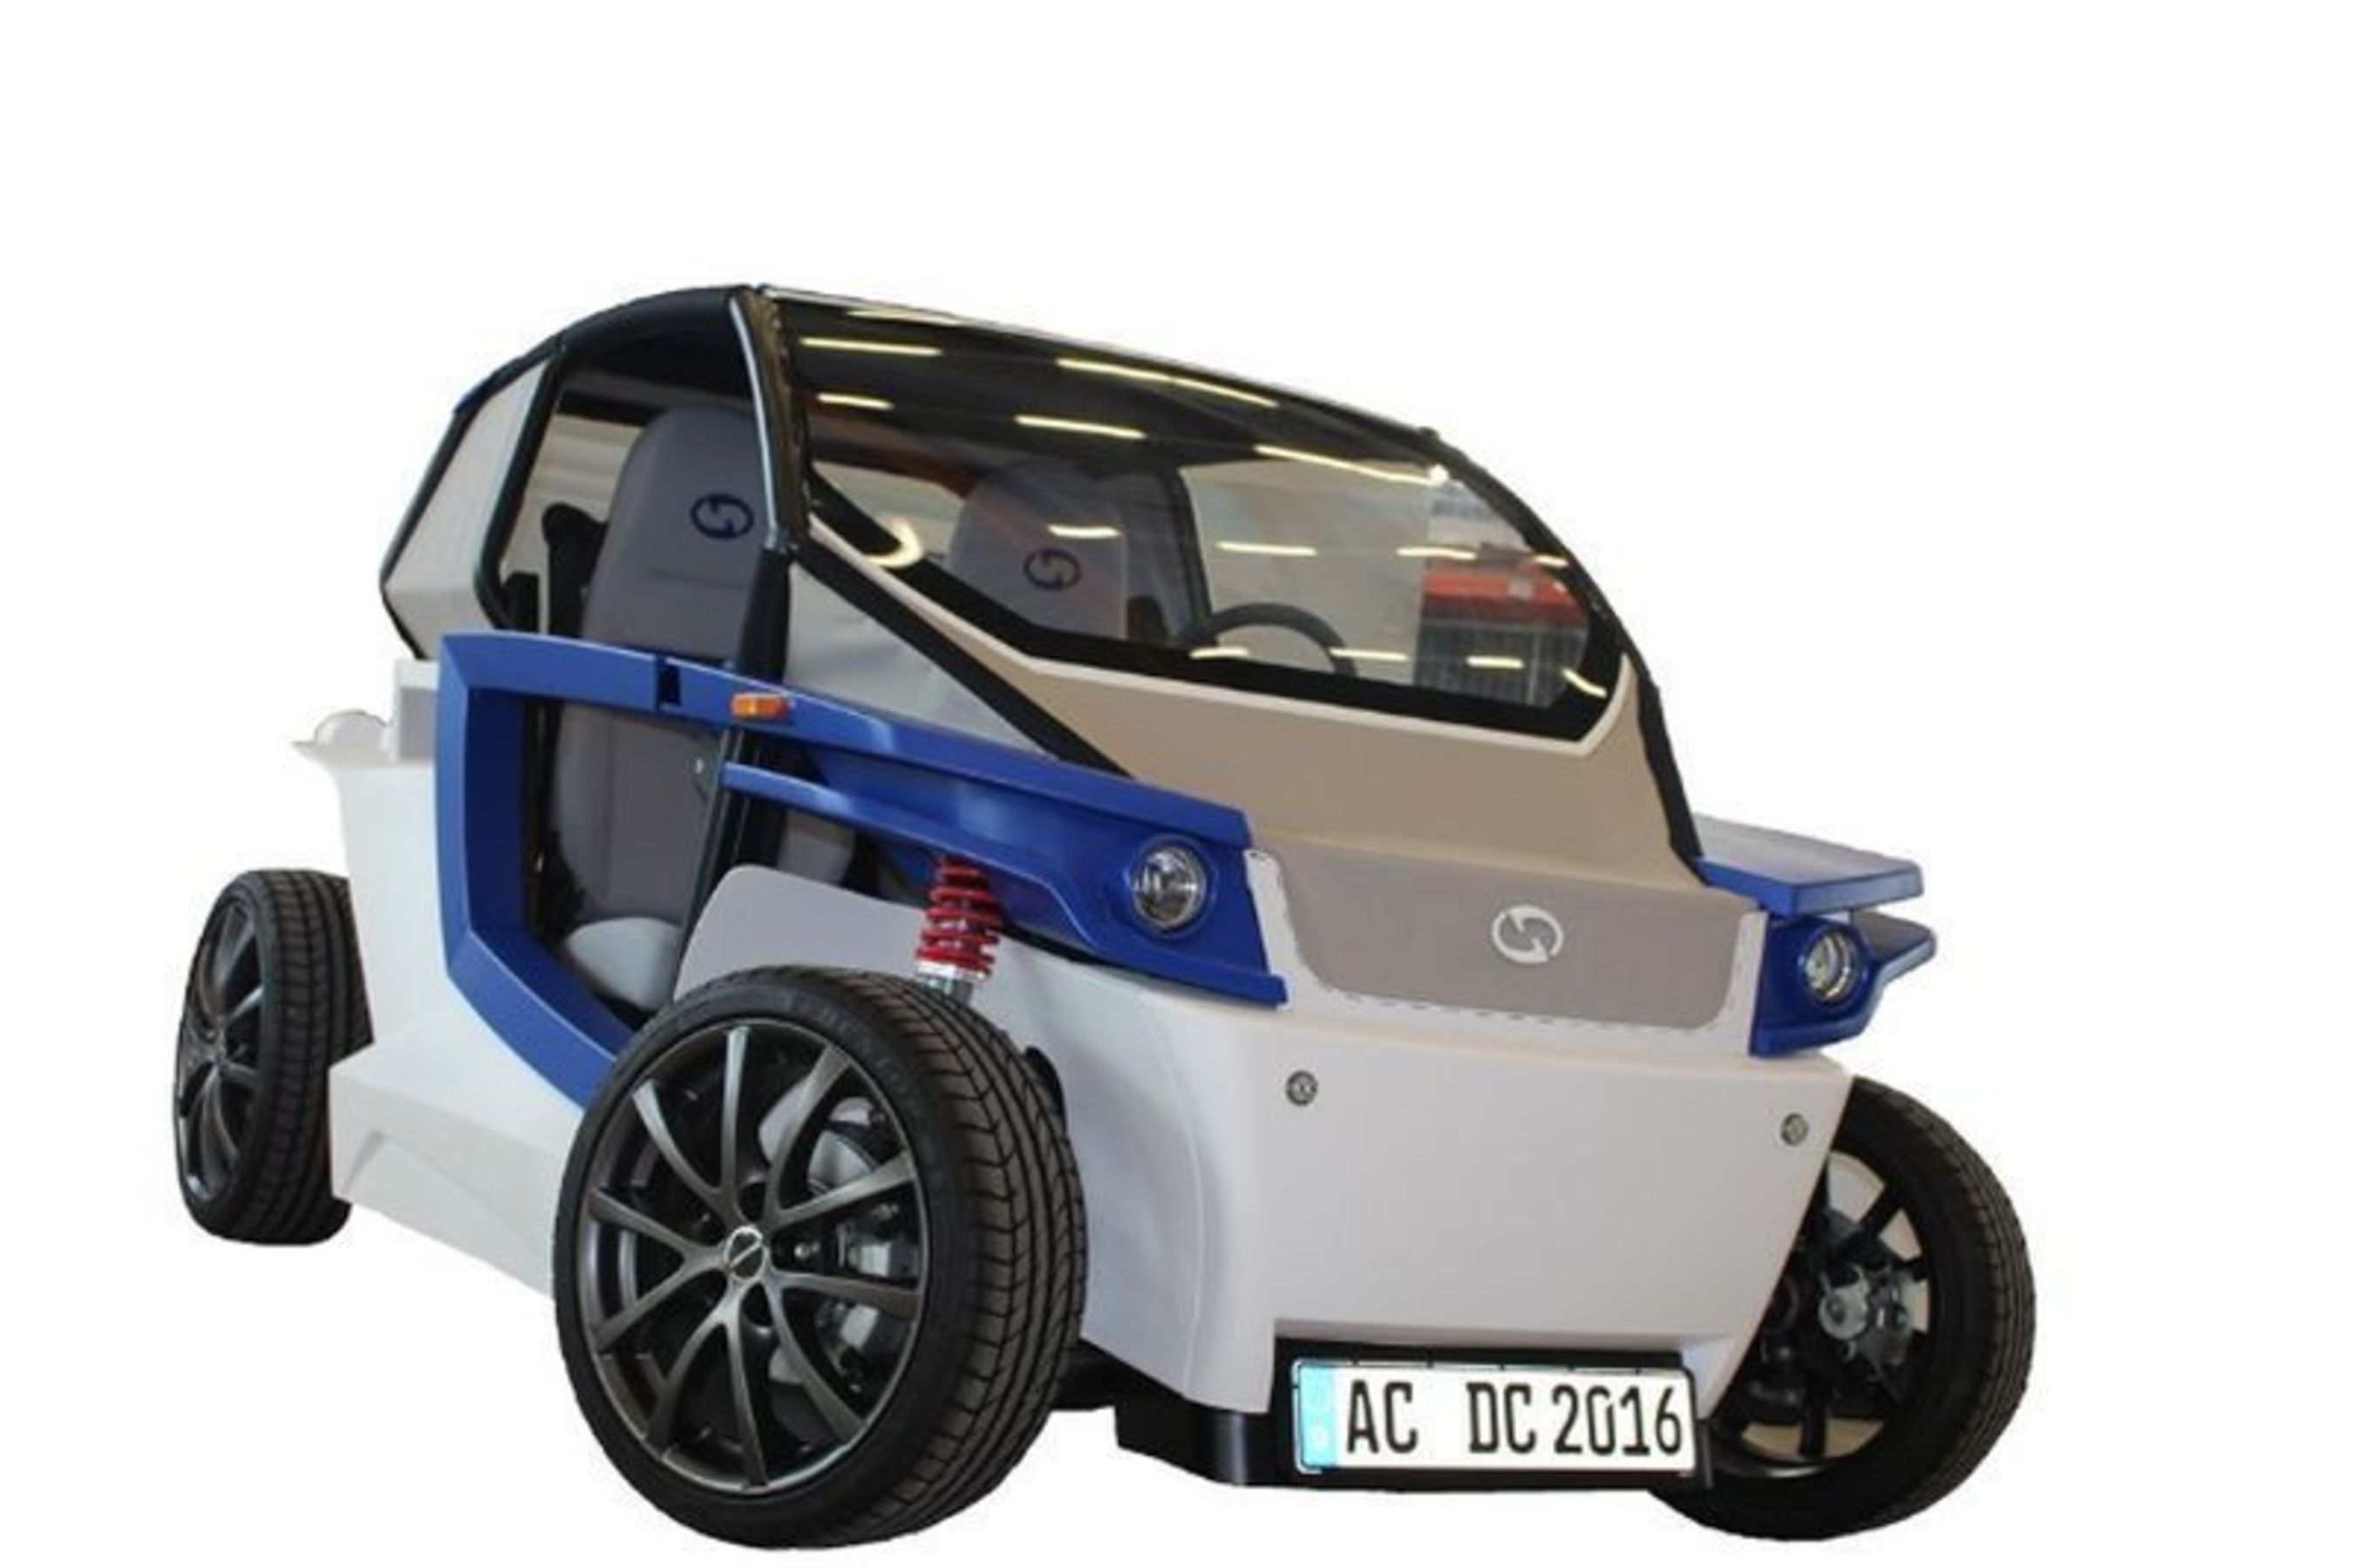 The fully-functional prototype of StreetScooter C16 electric car was developed in just 12 months by replacing traditional automotive manufacturing processes with Stratasys 3D printing throughout the design phase. (PRNewsFoto/Stratasys Ltd)